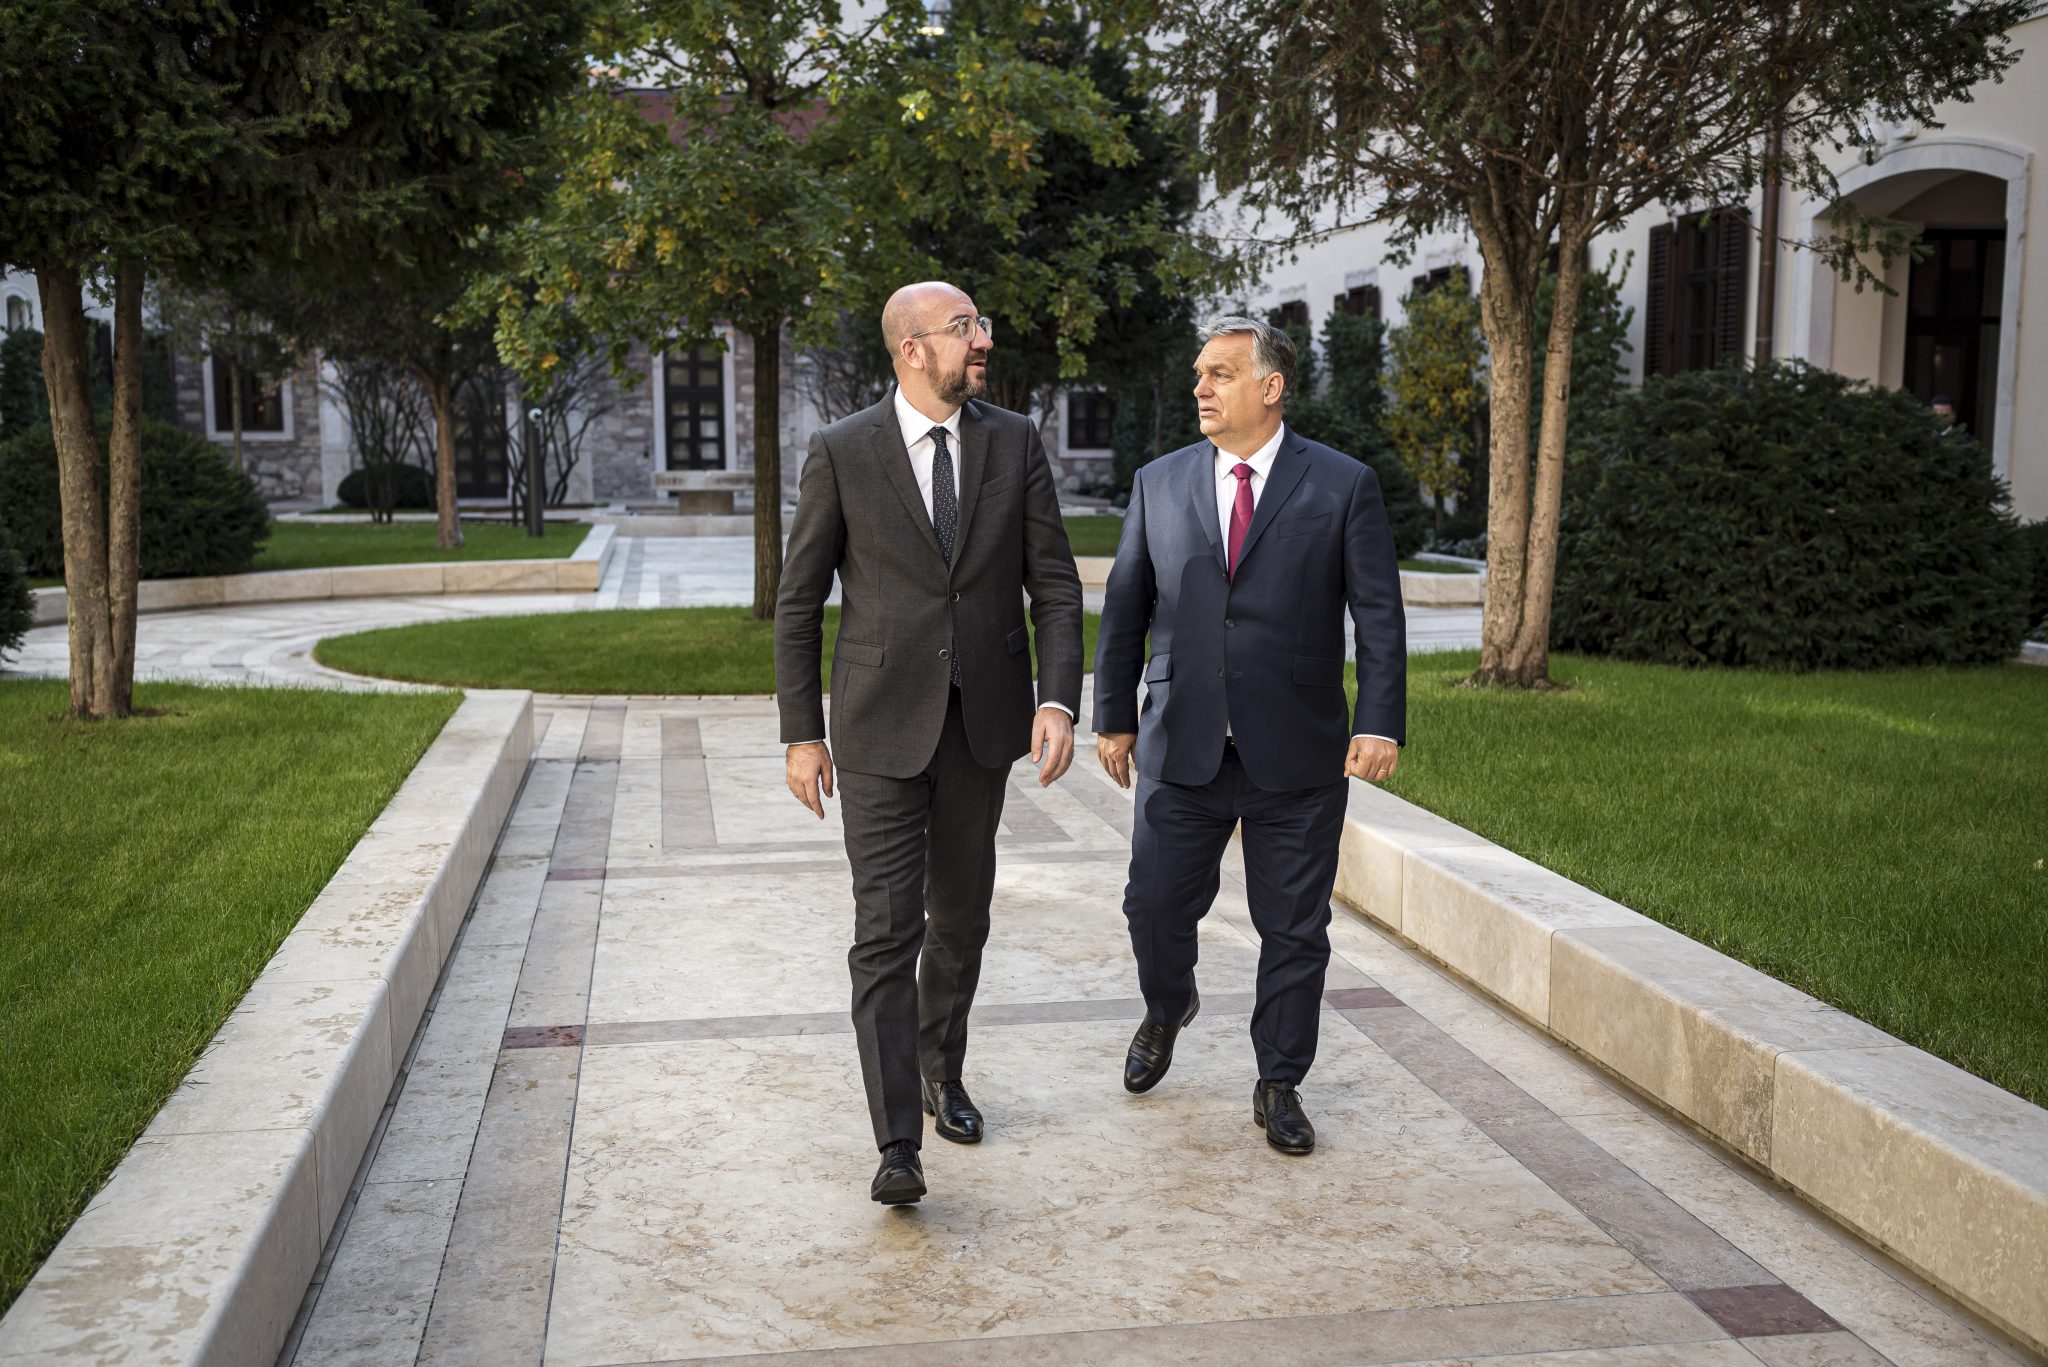 PM Orbán Discusses Ukraine-Russia Stand-Off with European Council President